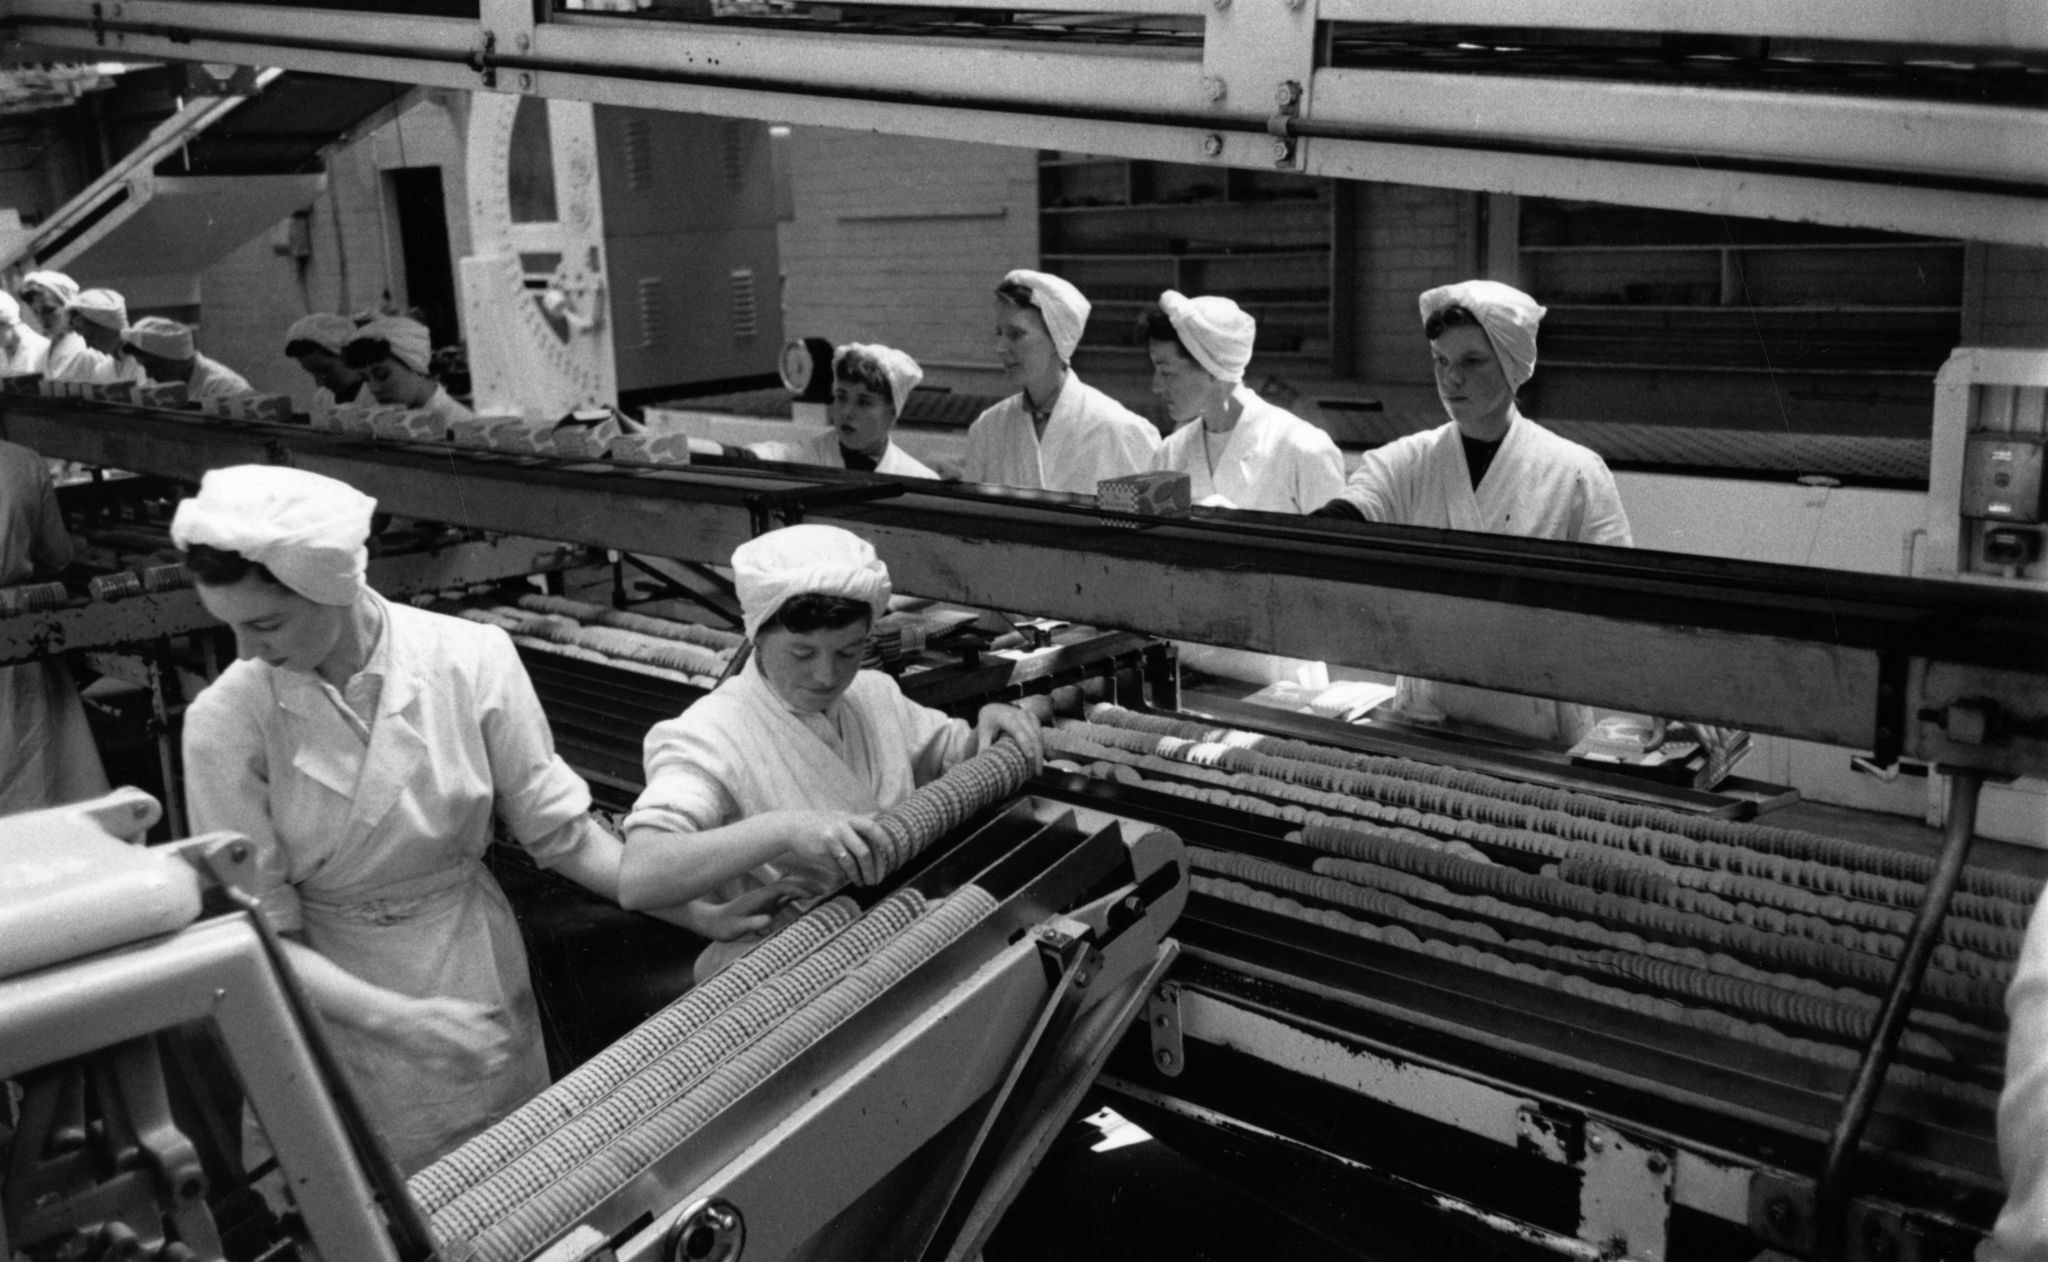 20th August 1955: Workers checking the quality of biscuits on a conveyor belt in the Glengarry Bakery of William Macdonald and Sons, Glasgow. This company's 24-hour production line generates a constant stream of biscuits and produces a quarter of Britain's total chocolate biscuit output. Original Publication: Picture Post - 7942 - Let Glasgow Flourish! - pub. 1955 (Photo by Haywood Magee/Picture Post/Hulton Archive/Getty Images)